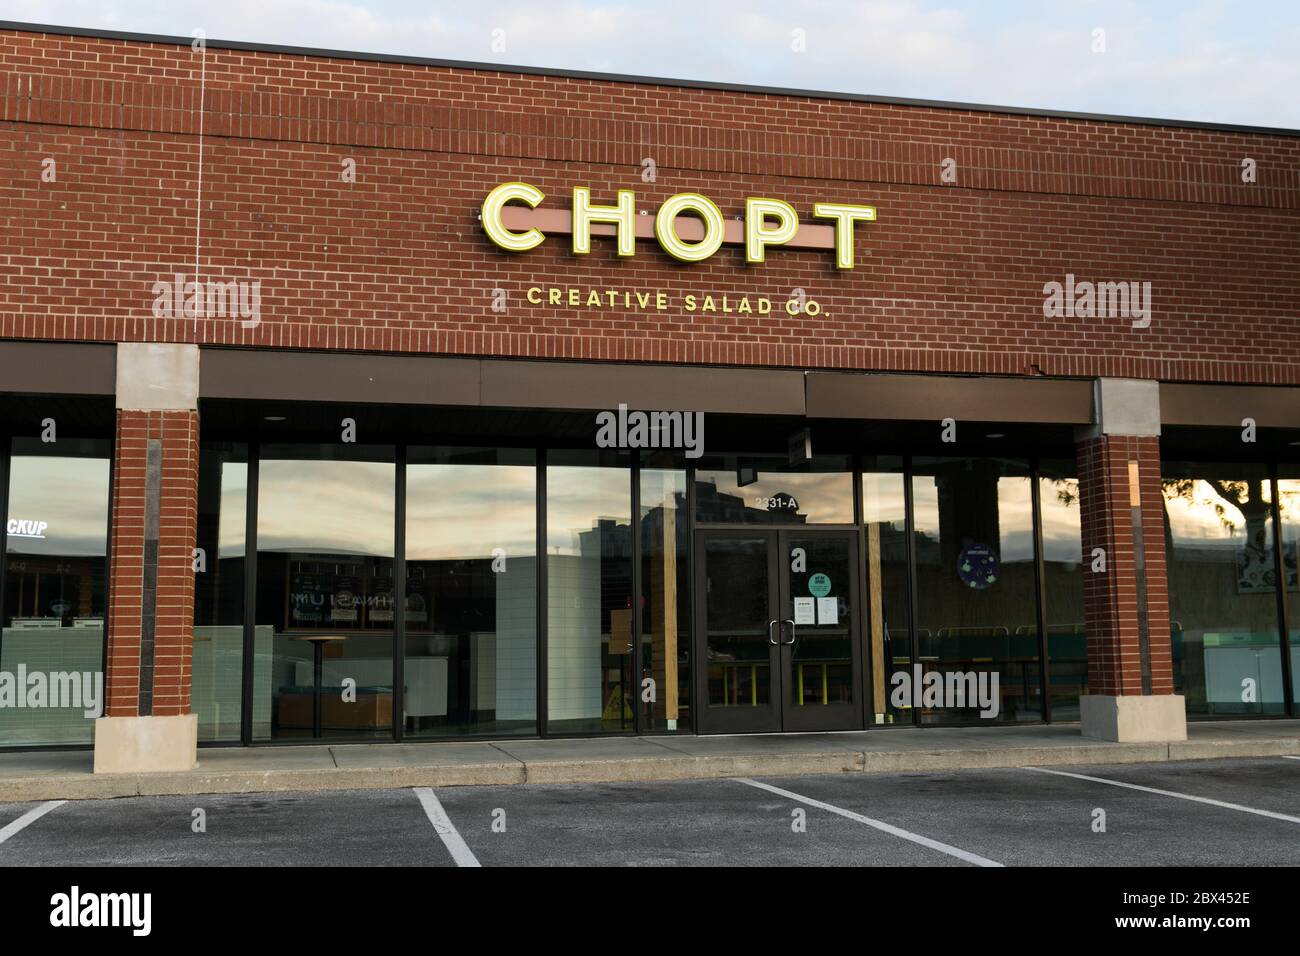 A logo sign outside of a Chopt Creative Salad Company restaurant location in Annapolis, Maryland on May 25, 2020. Stock Photo